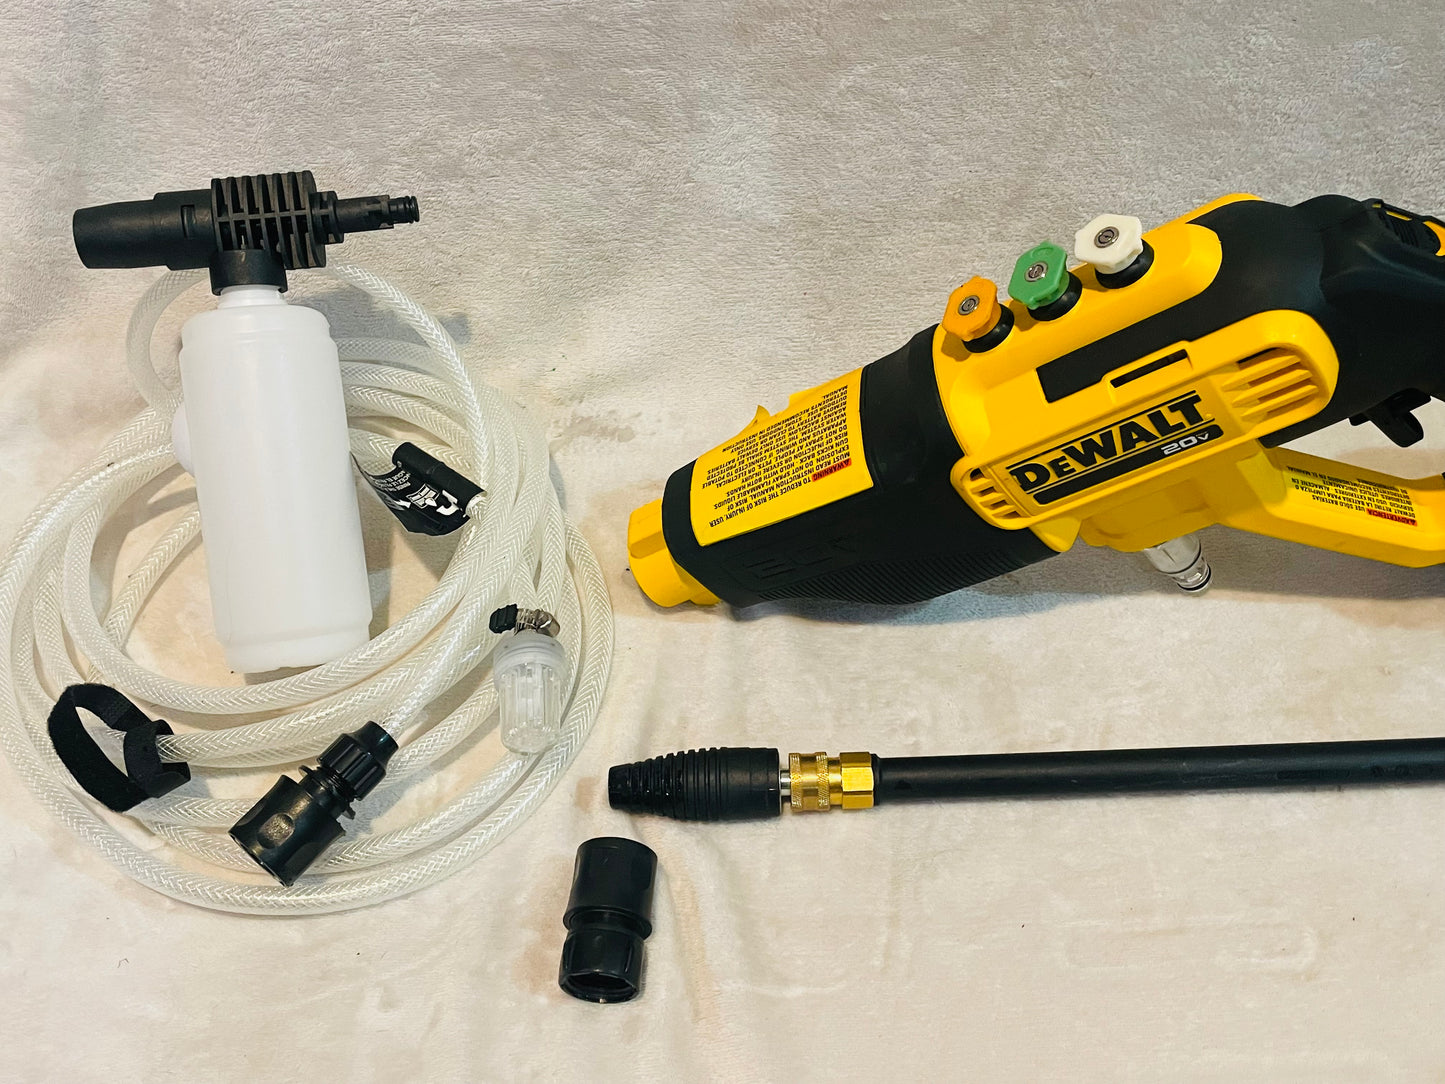 DEWALT 20V 550 PSI 1.0 GPM Cordless Power Cleaner with (1) Battery and Charger